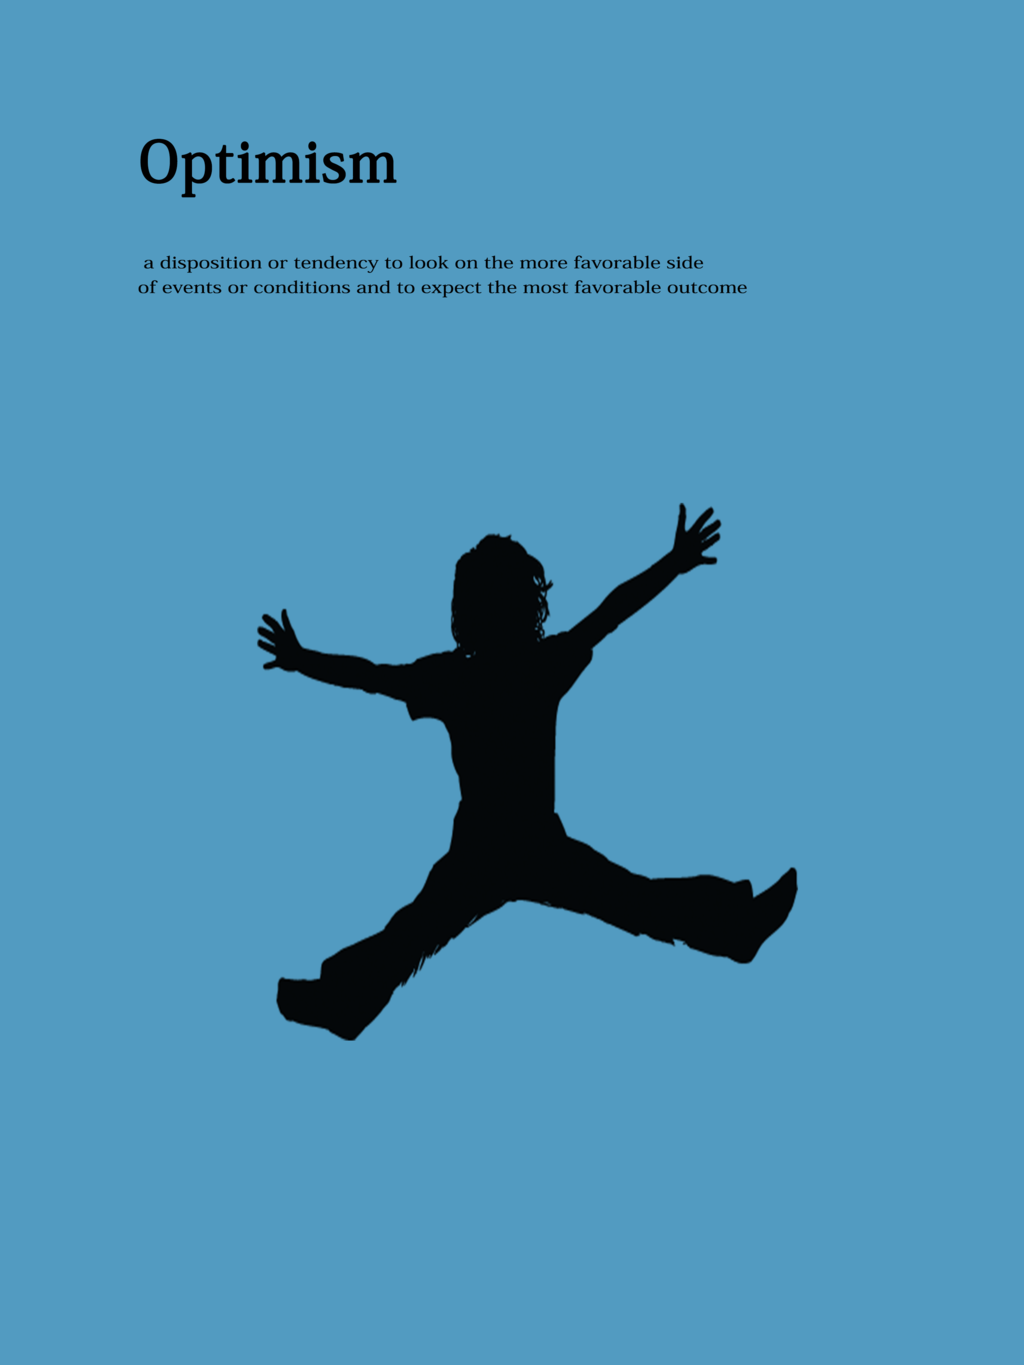 Wallpaper On Optimism Quotes